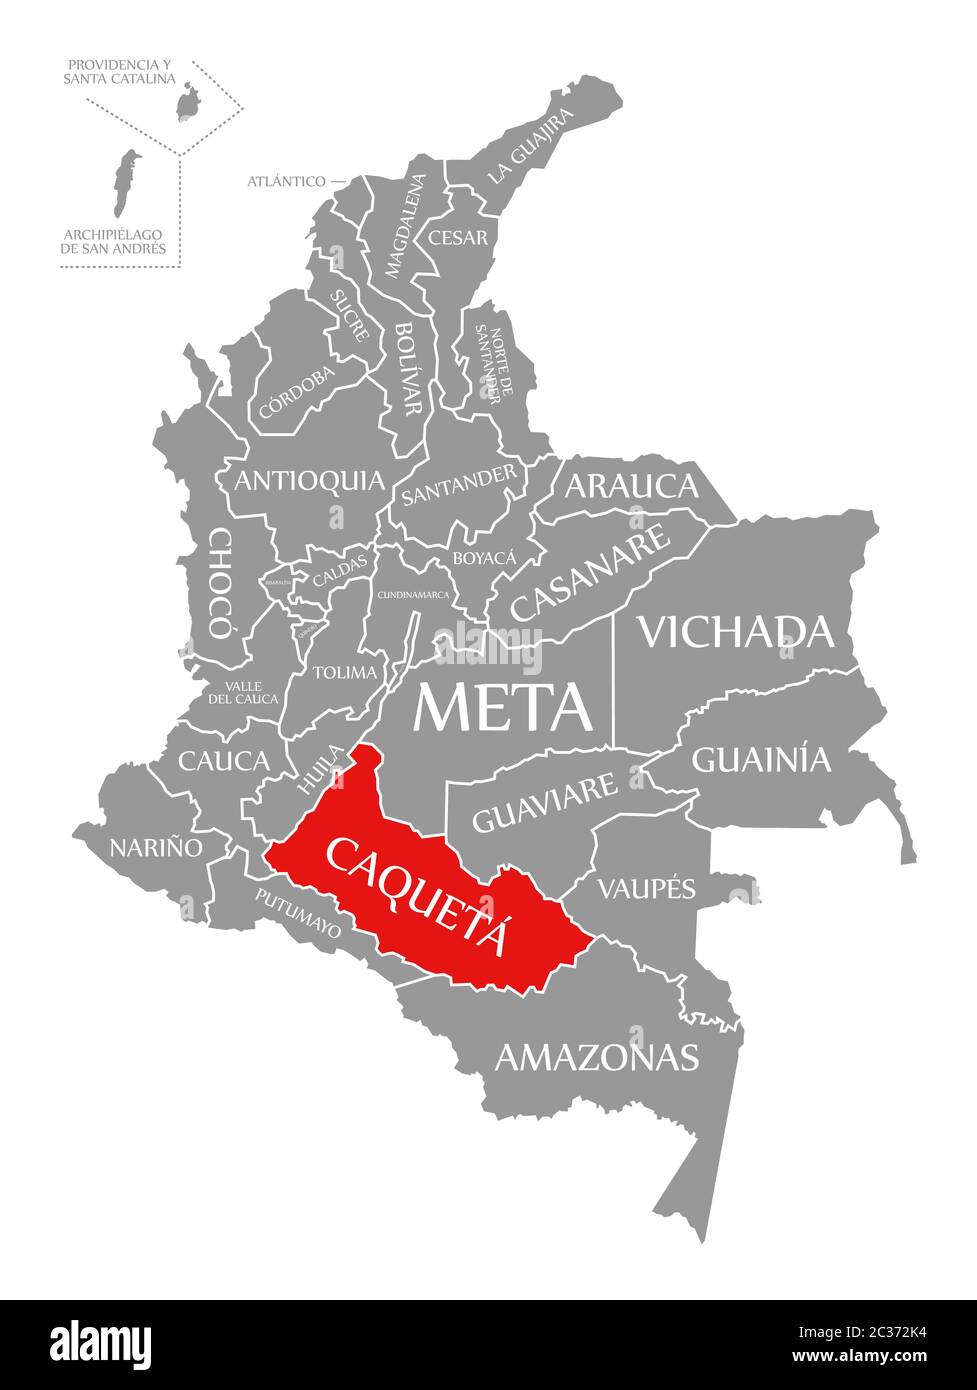 Caqueta red highlighted in map of Colombia Stock Photo